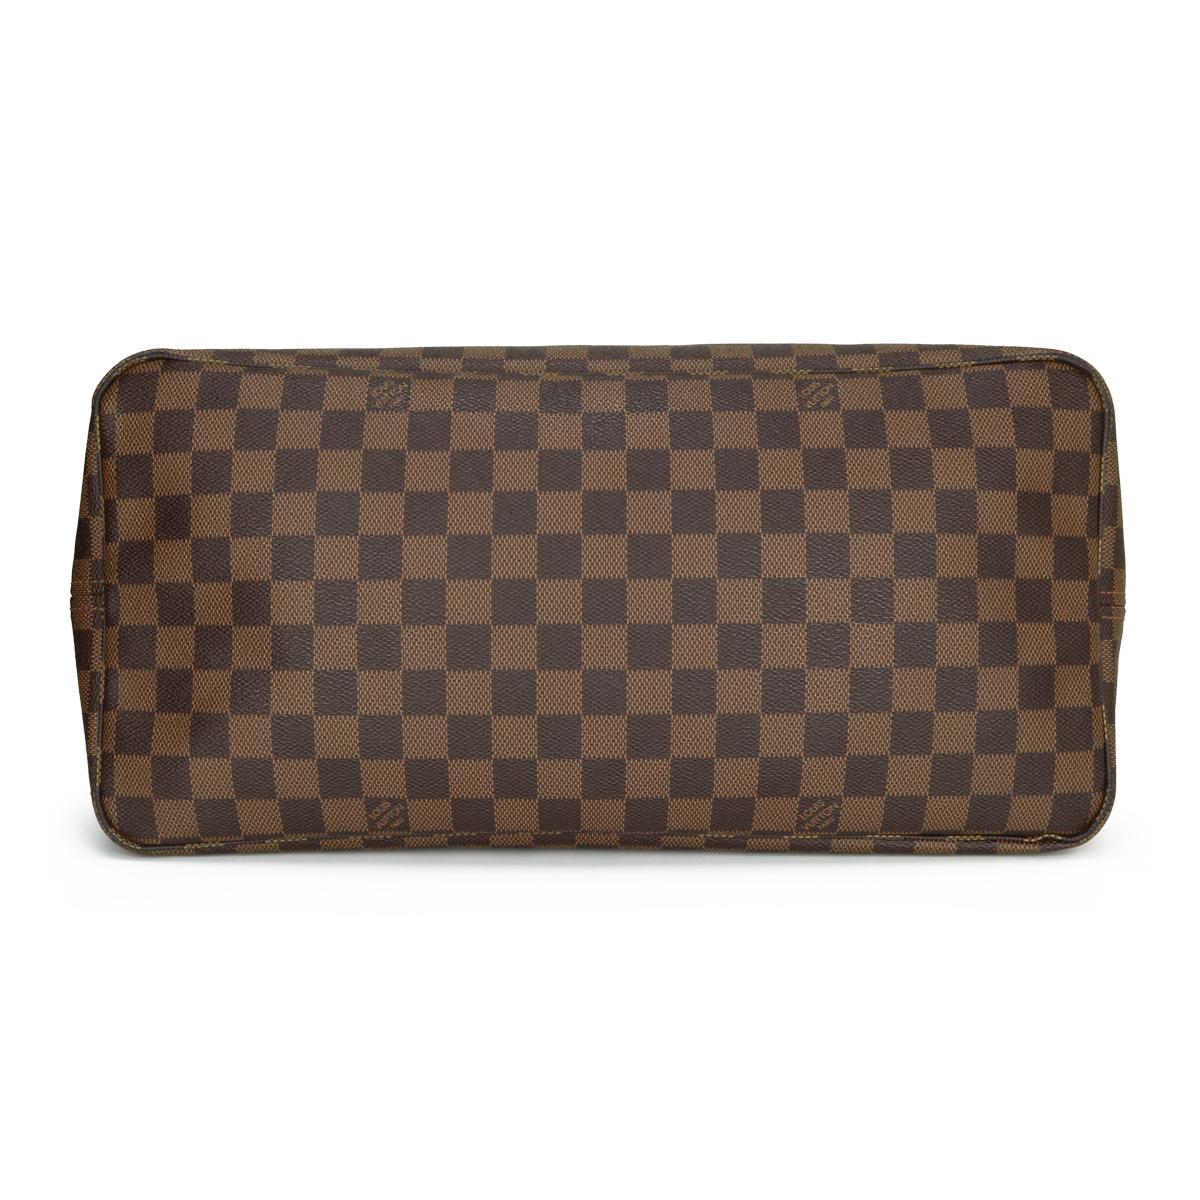 Louis Vuitton Neverfull GM Bag in Damier Ebène with Cherry Red Interior 2015 2